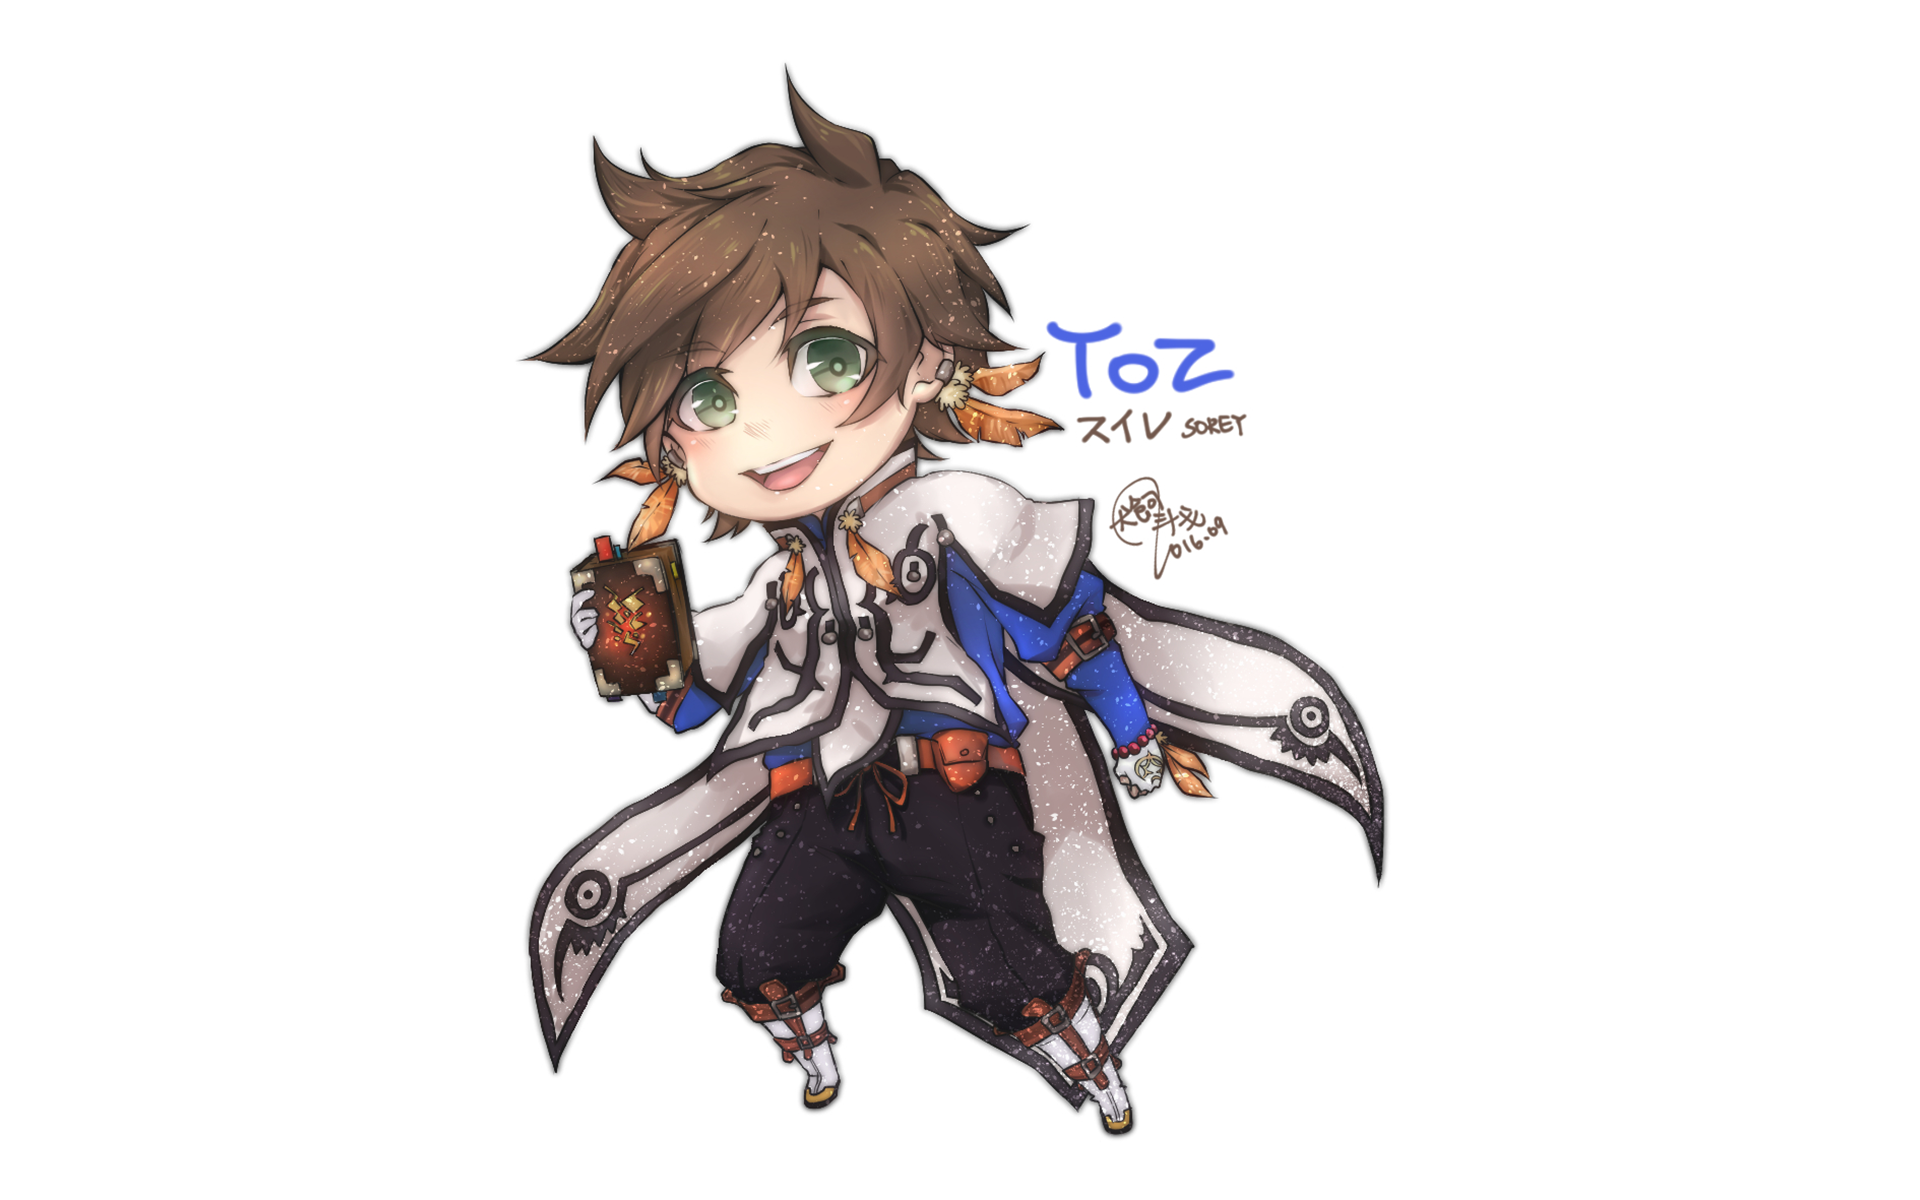 Sorey - TOZ THE X EP.4 by mkayswritings on DeviantArt